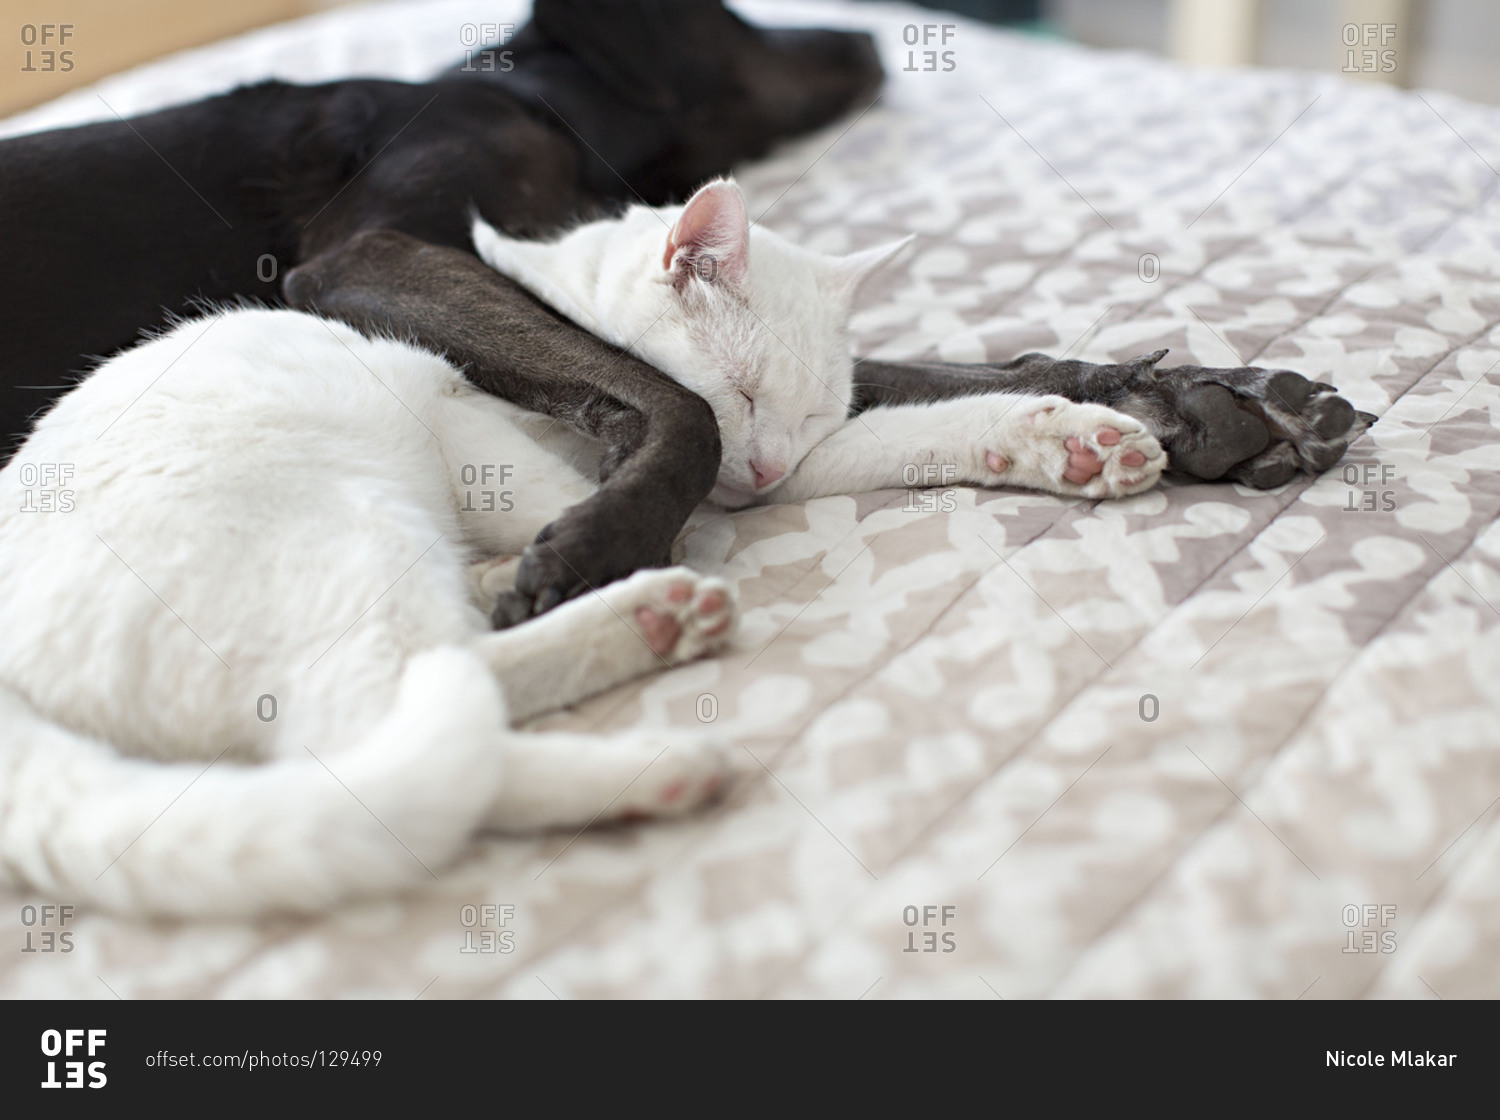 Dog and cat sleeping together on bed